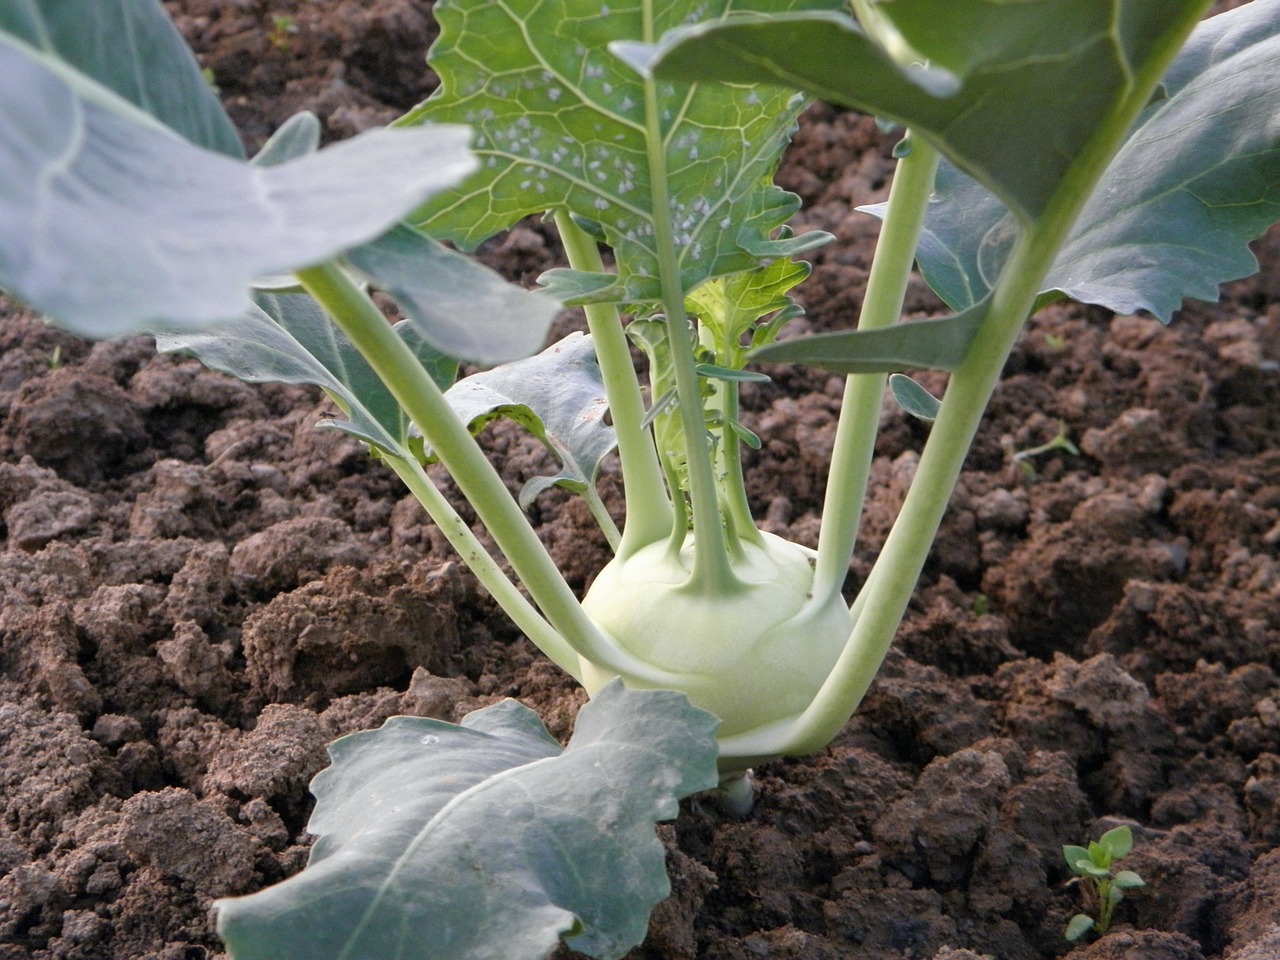 Kohlrabi: How To Grow This Weird Looking Vegetable